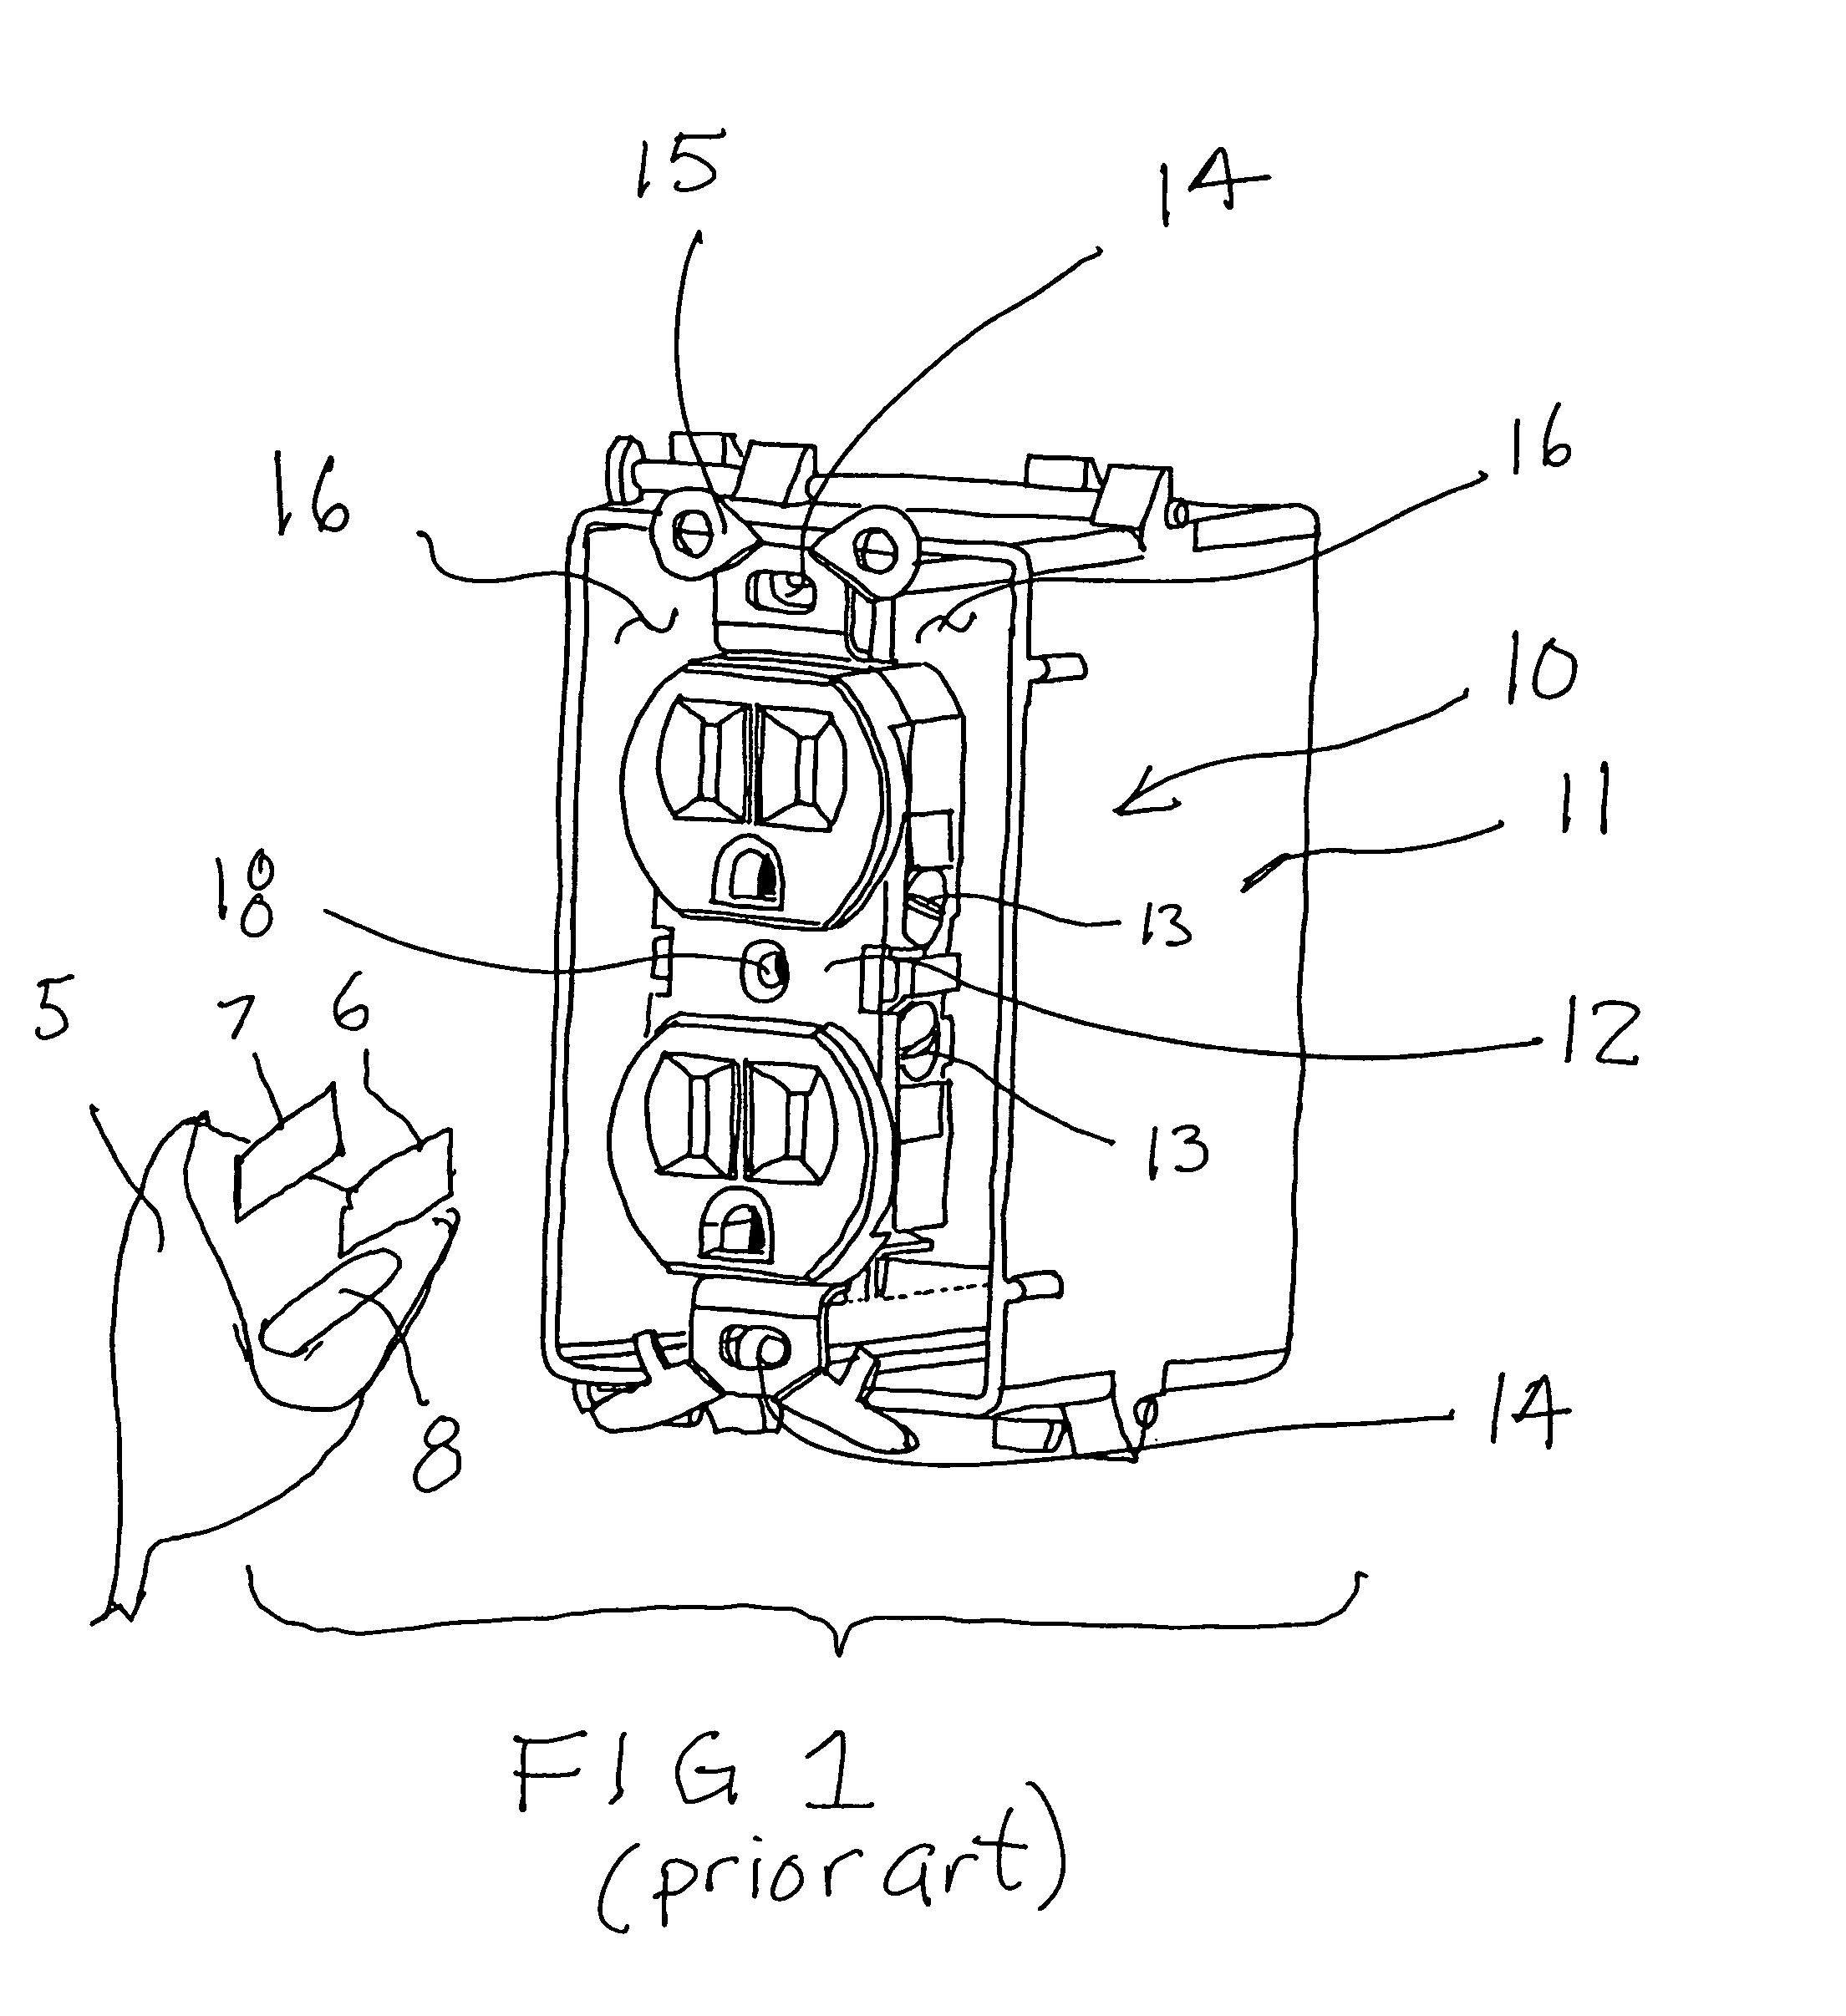 Enclosure for wiring devices